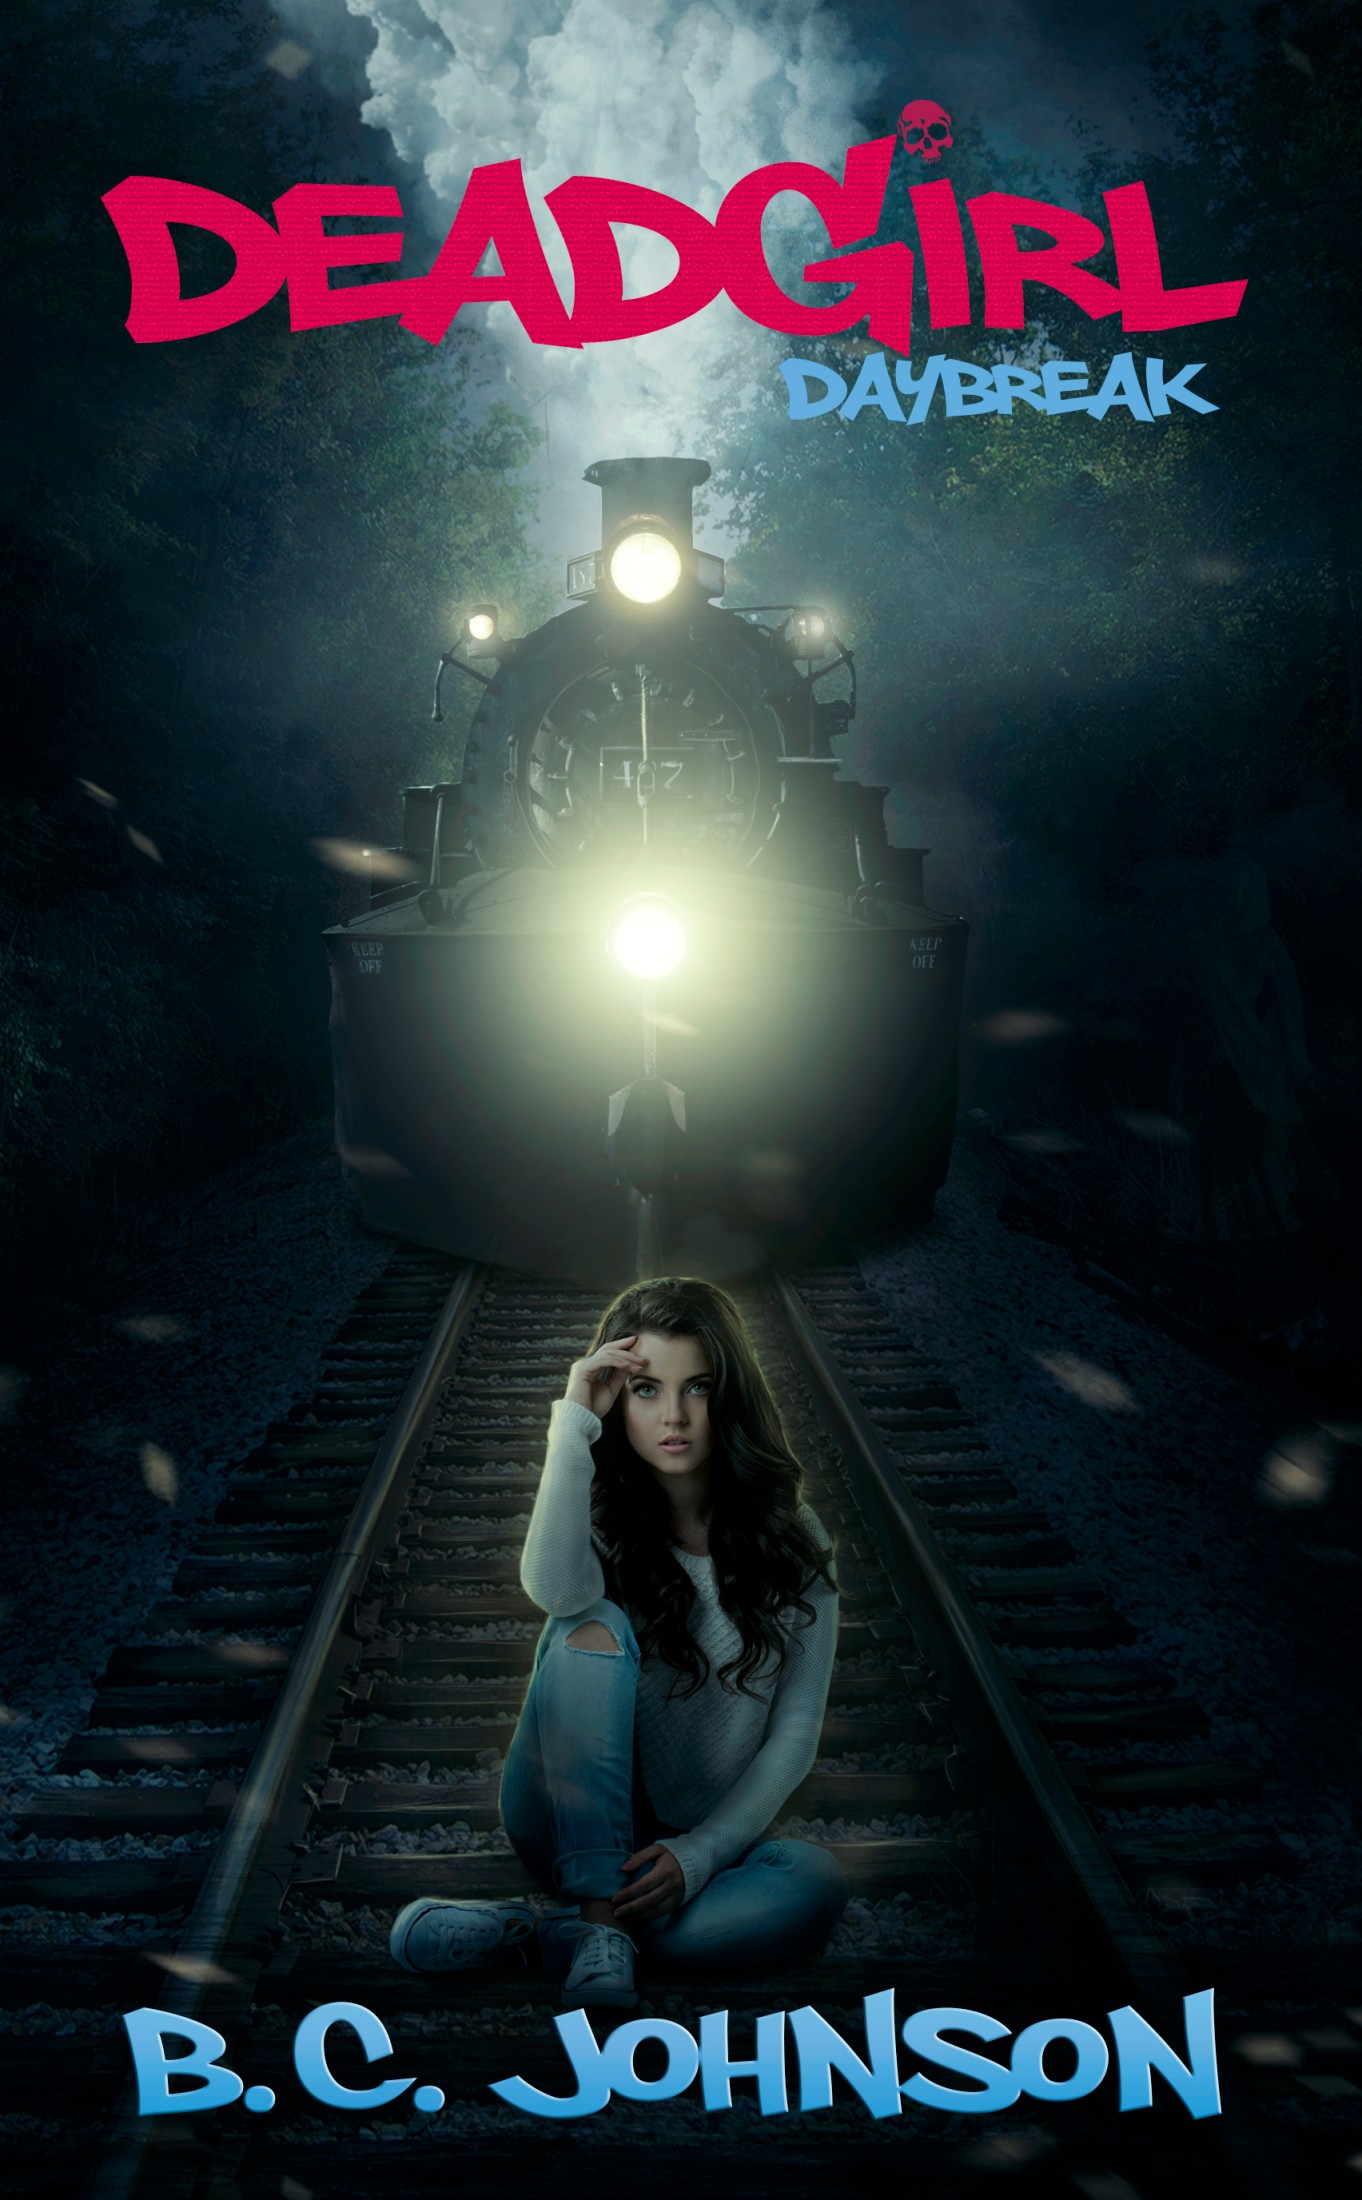 Cover of Deadgirl Daybreak, Lucy is sitting on train tracks